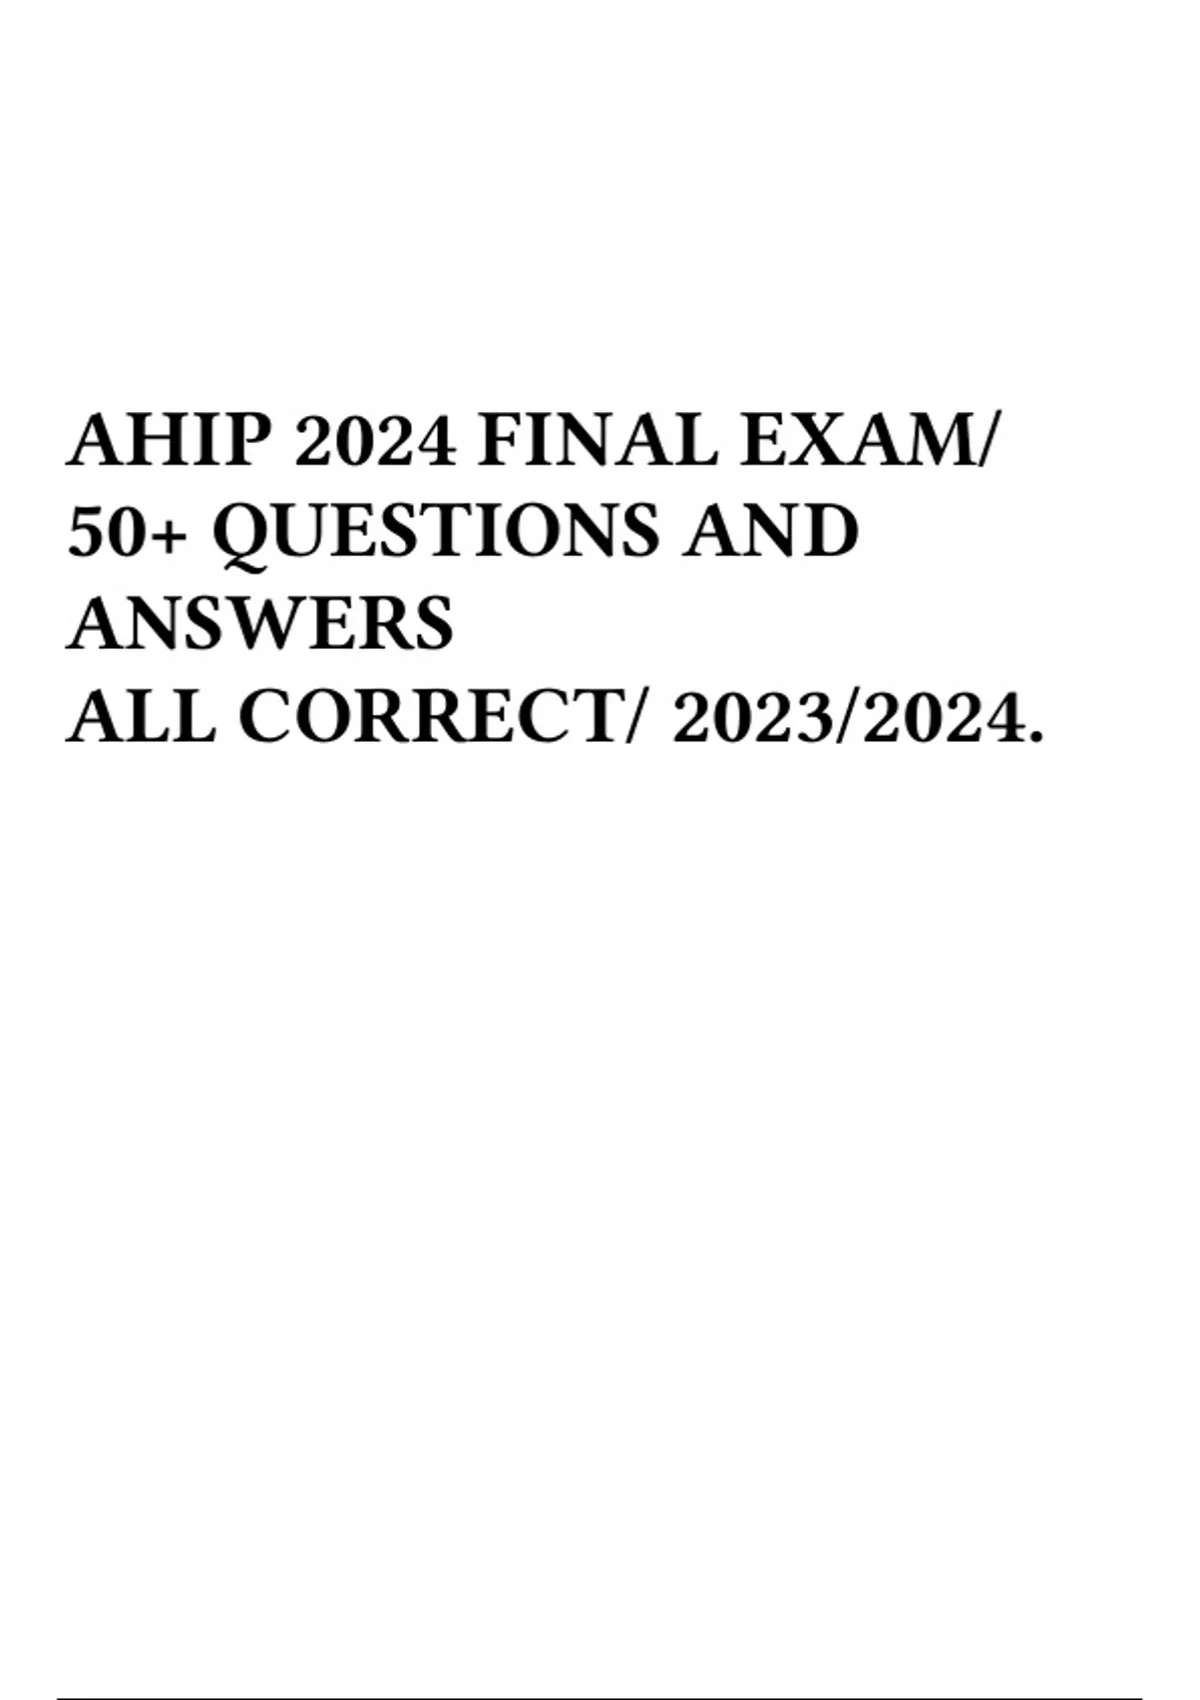 AHIP 2024 FINAL EXAM/ 50+ QUESTIONS AND ANSWERS ALL CORRECT/ 2023/2024